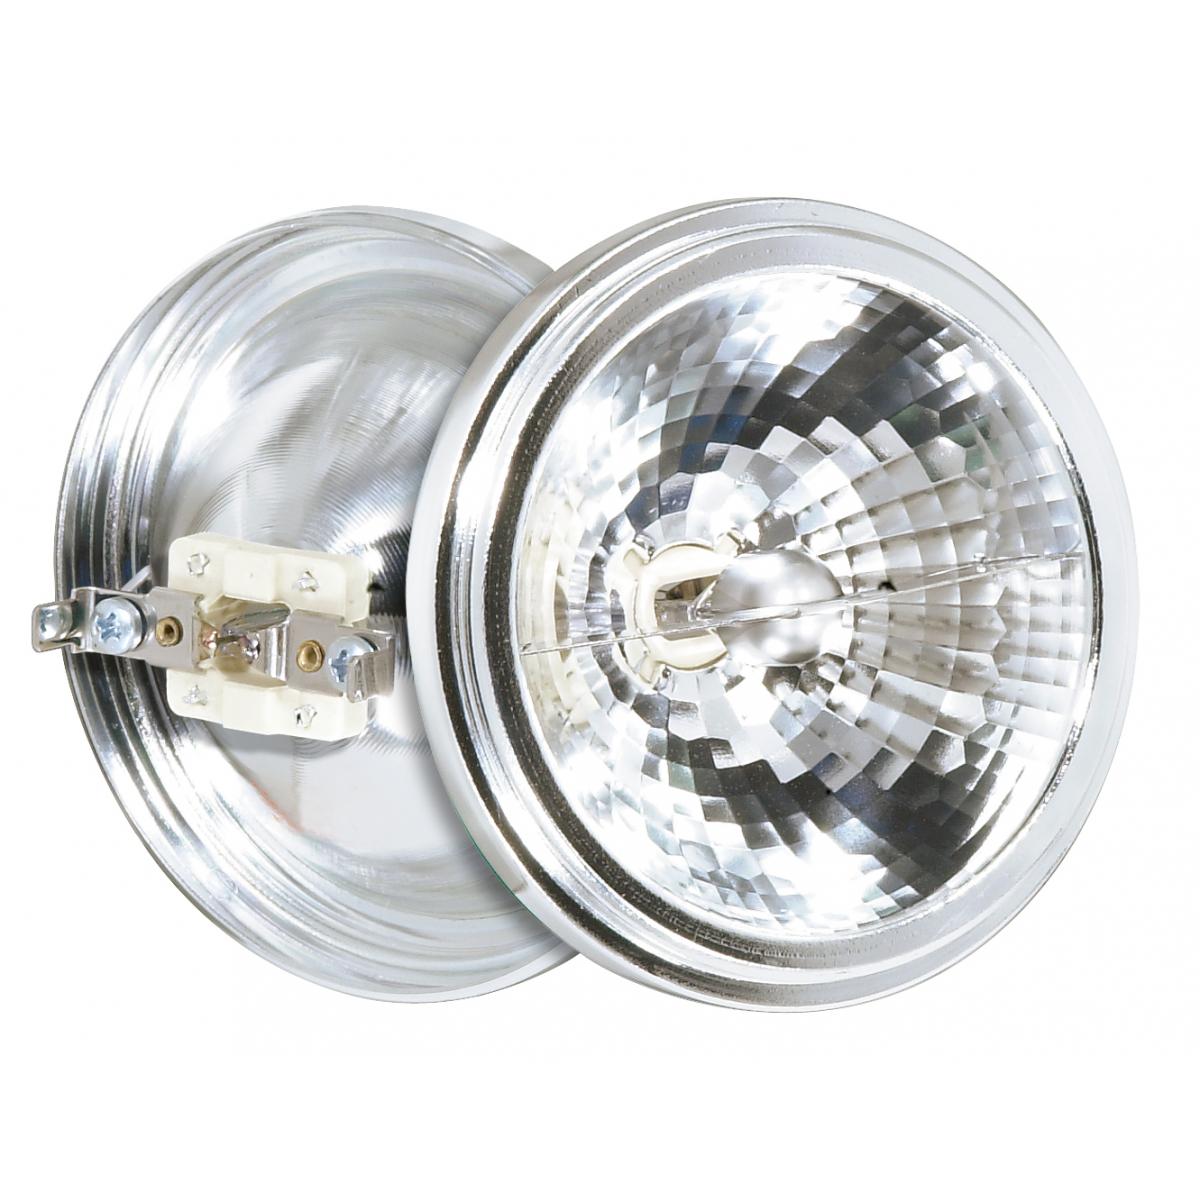 Replacement for Satco S4695 100AR111/25/FL 100 Watt Halogen AR111 3000 Average rated hours G53 base 12 Volt - NOW SSP only S4694